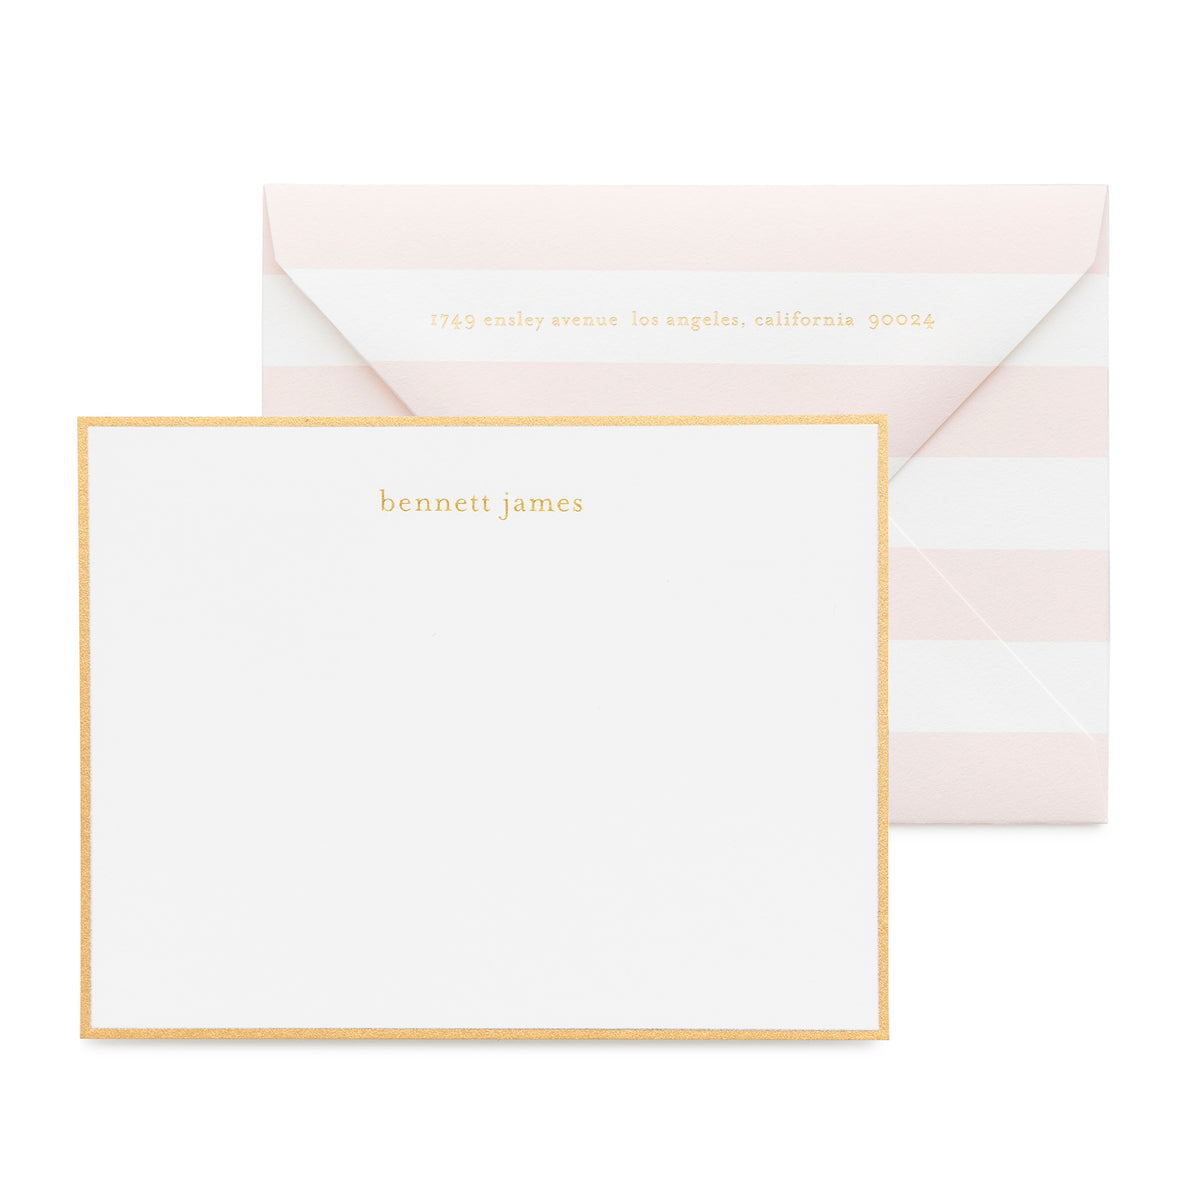 White and gold custom stationery with a pink stripe envelope